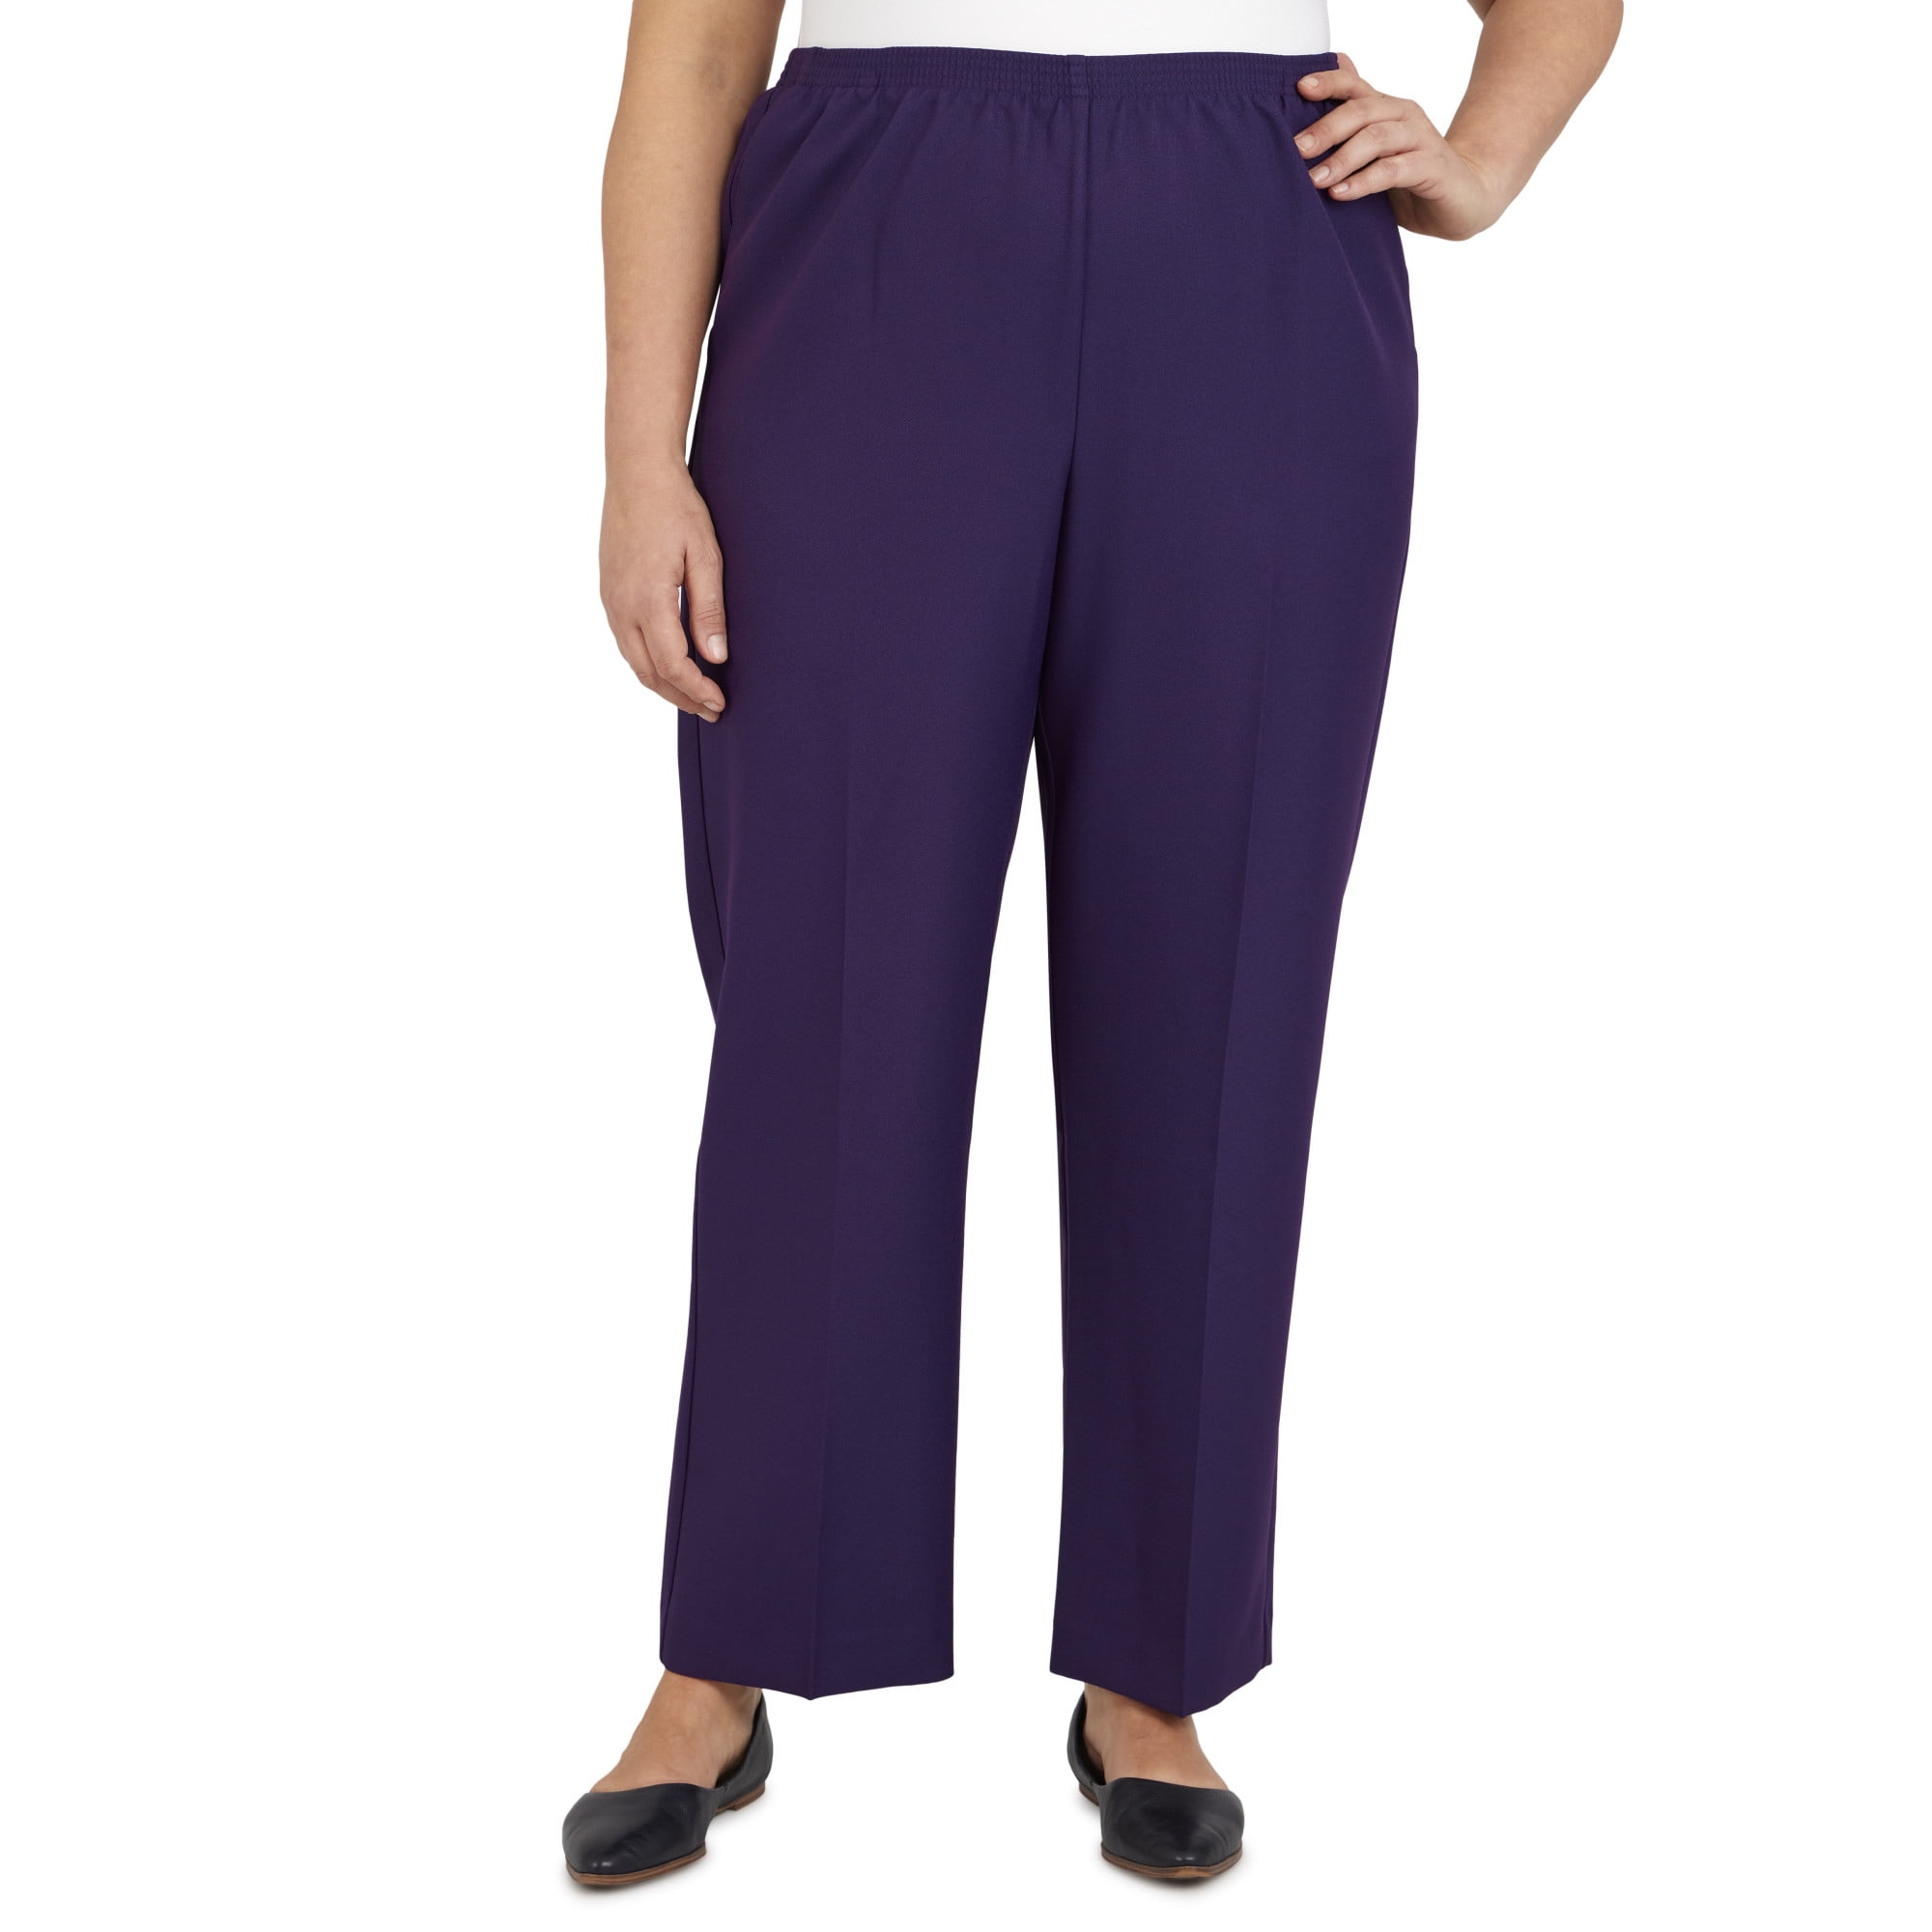 Alfred Dunner | Pants & Jumpsuits | Nwt Alfred Dunner All Around Elastic  Waist Cotton Medium Twill Pants | Poshmark